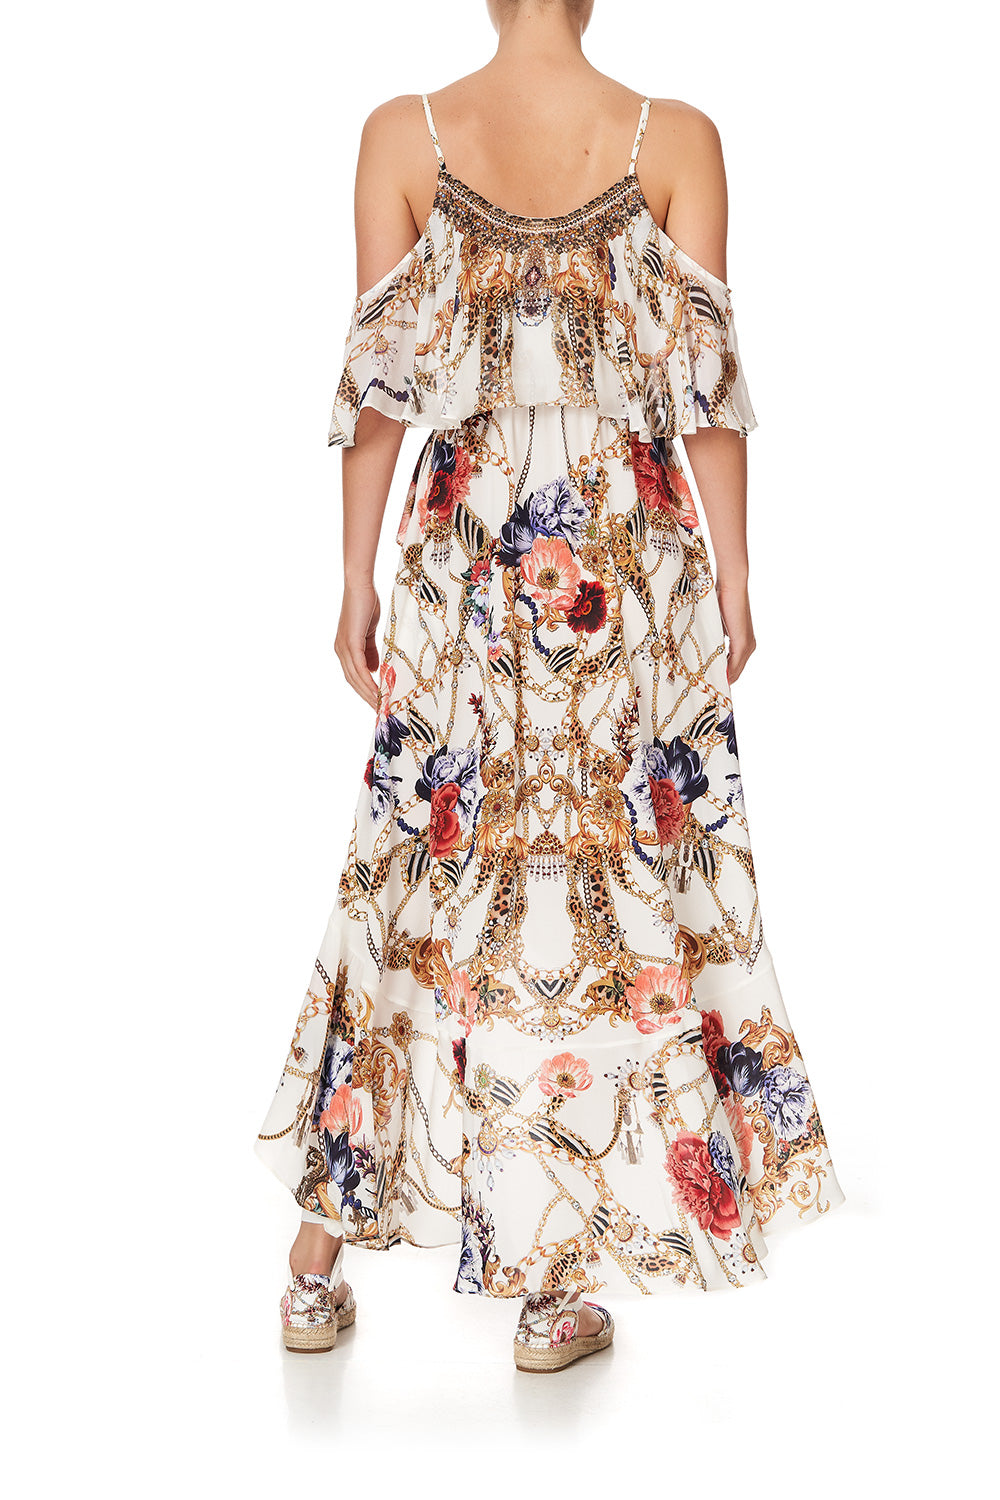 Camilla Ruffle Overlay Wrap Dress, Reign Supreme Ivory Floral Silk